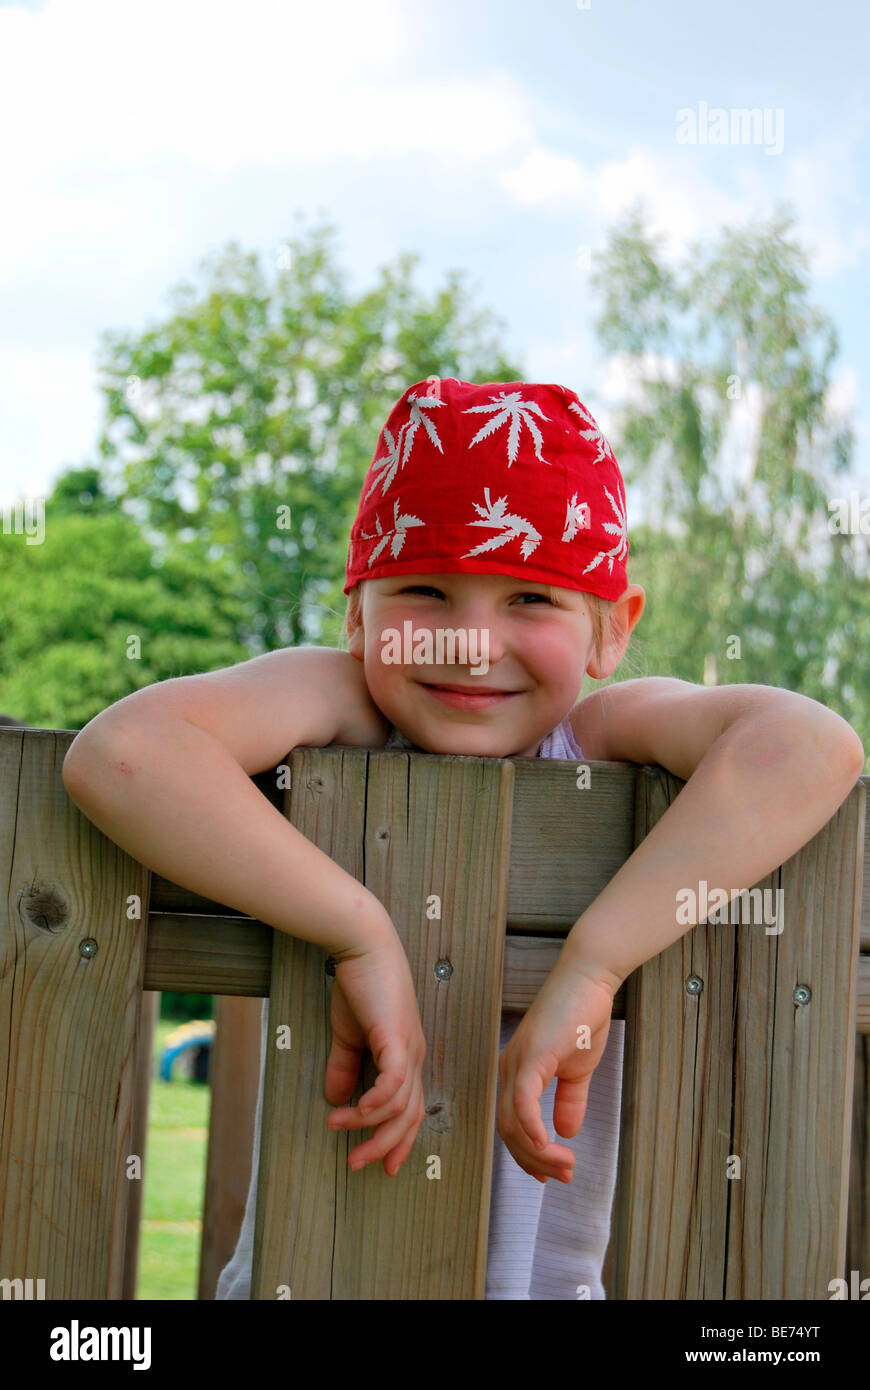 Girl, 5, wearing a red headscarf hanging over a garden fence like a young rascal Stock Photo